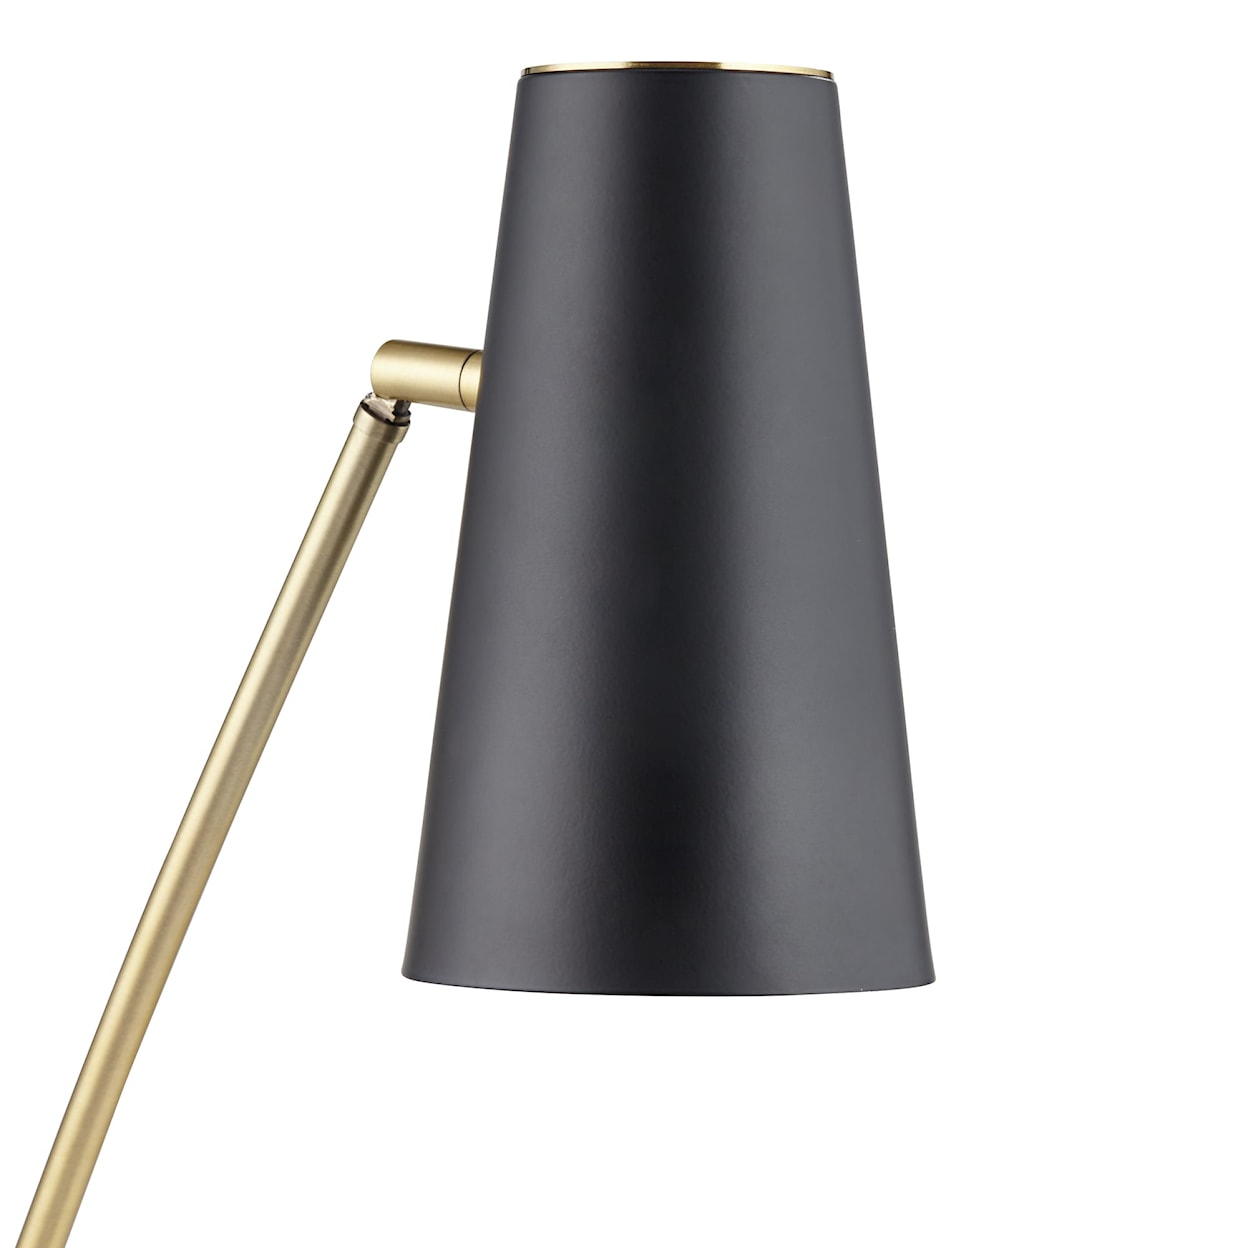 Pacific Coast Lighting Pacific Coast Lighting TL-Metal ant brass and matte black